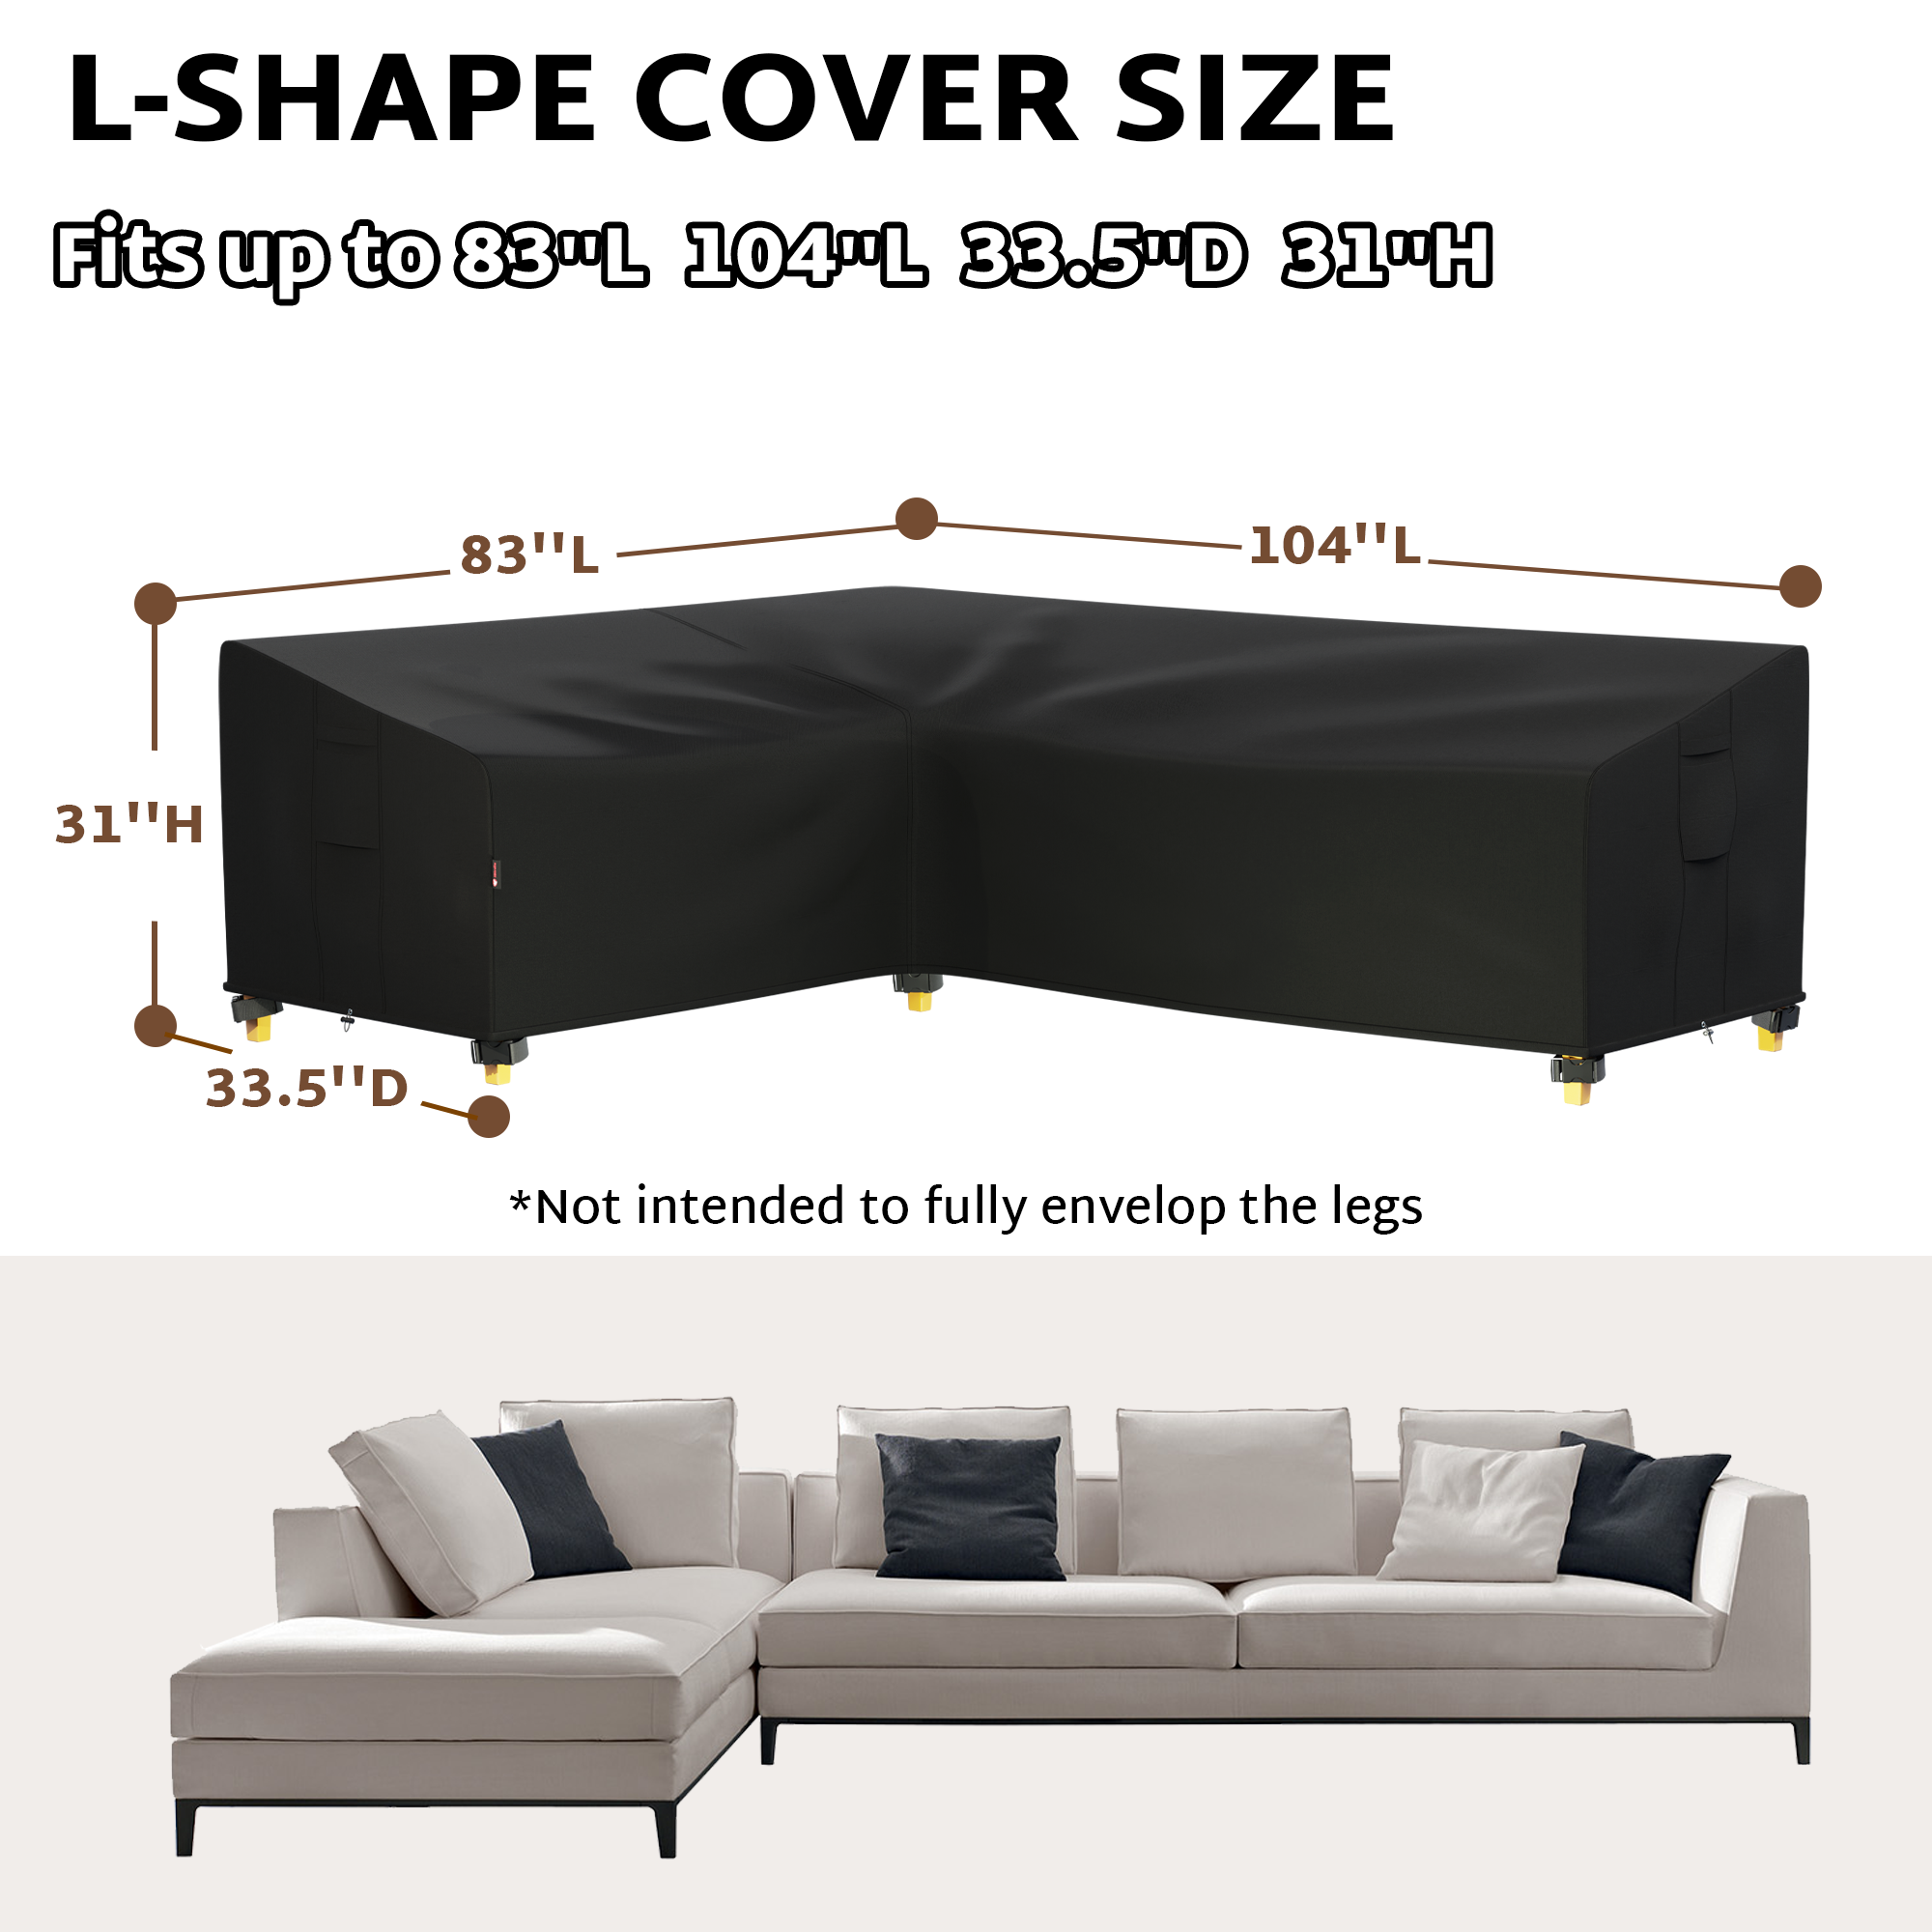 iBirdie Outdoor Sectional Cover Left L-Shaped Patio Sofa Waterproof Weatherproof 600D Heavy Duty Garden Furniture Cover Outside Sectional Couch Cover L shape